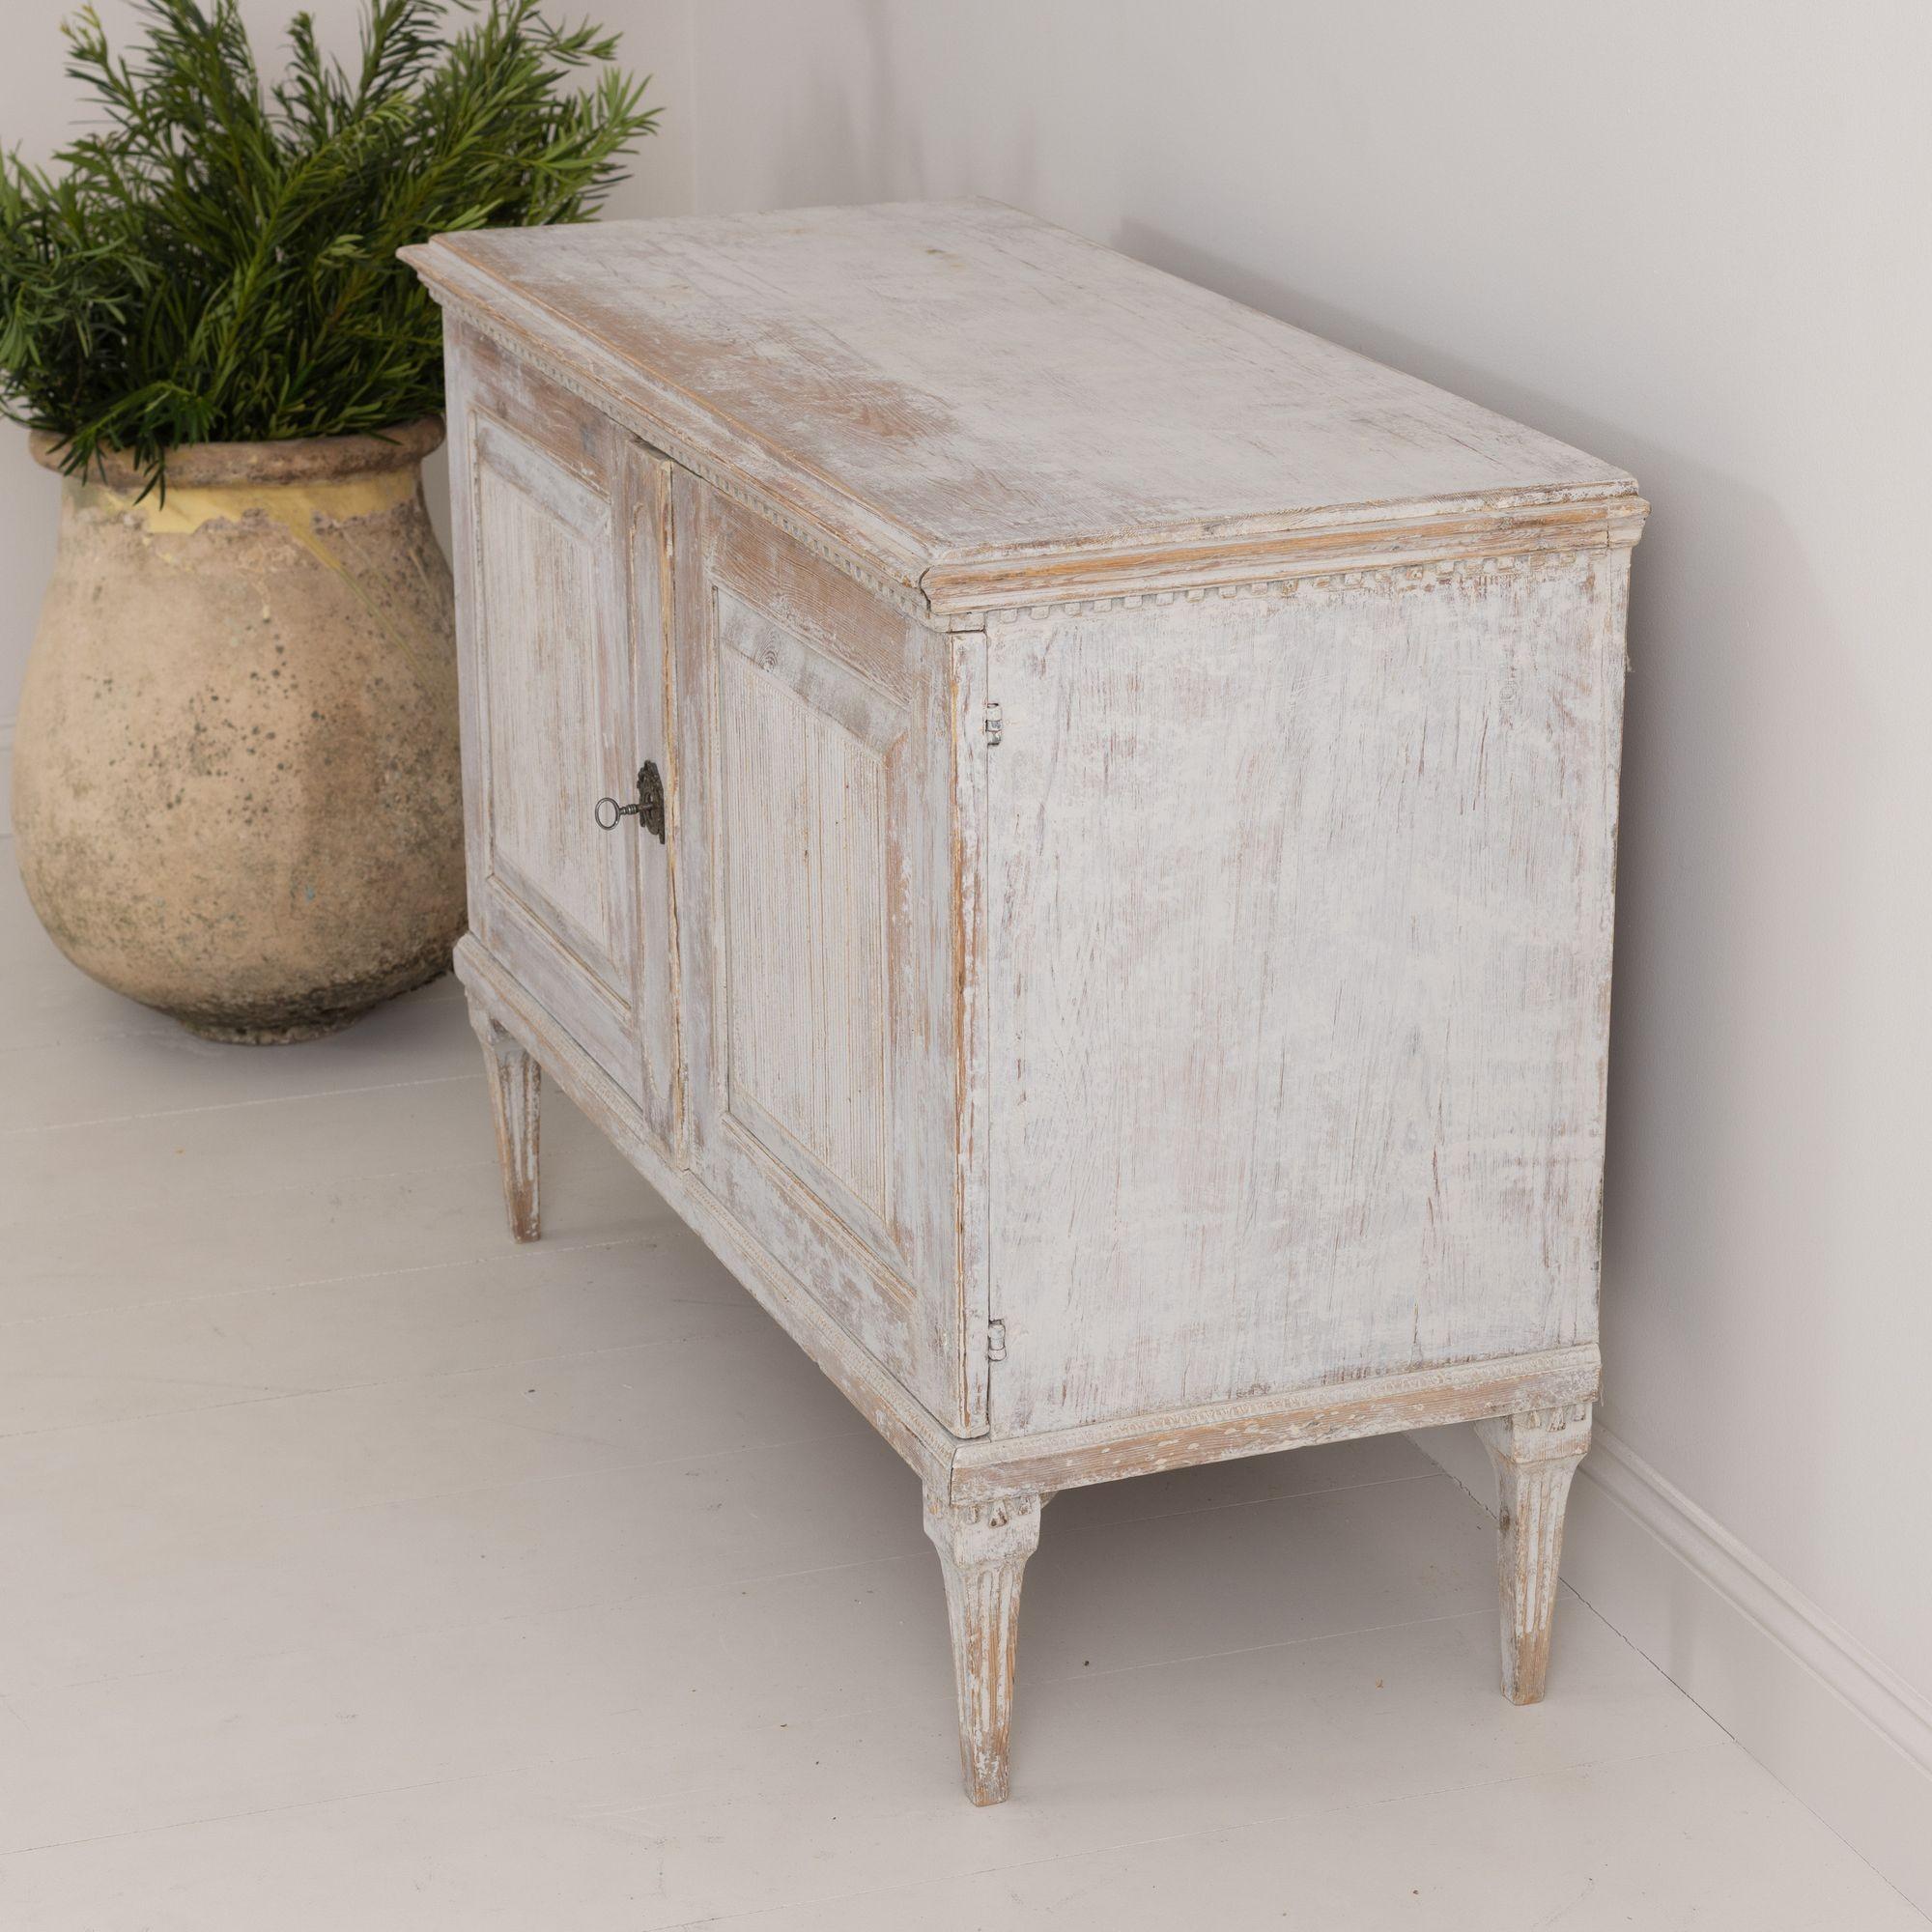 18th Century and Earlier 18th C. Swedish Gustavian Period Buffet with Reeded Doors in Original Paint